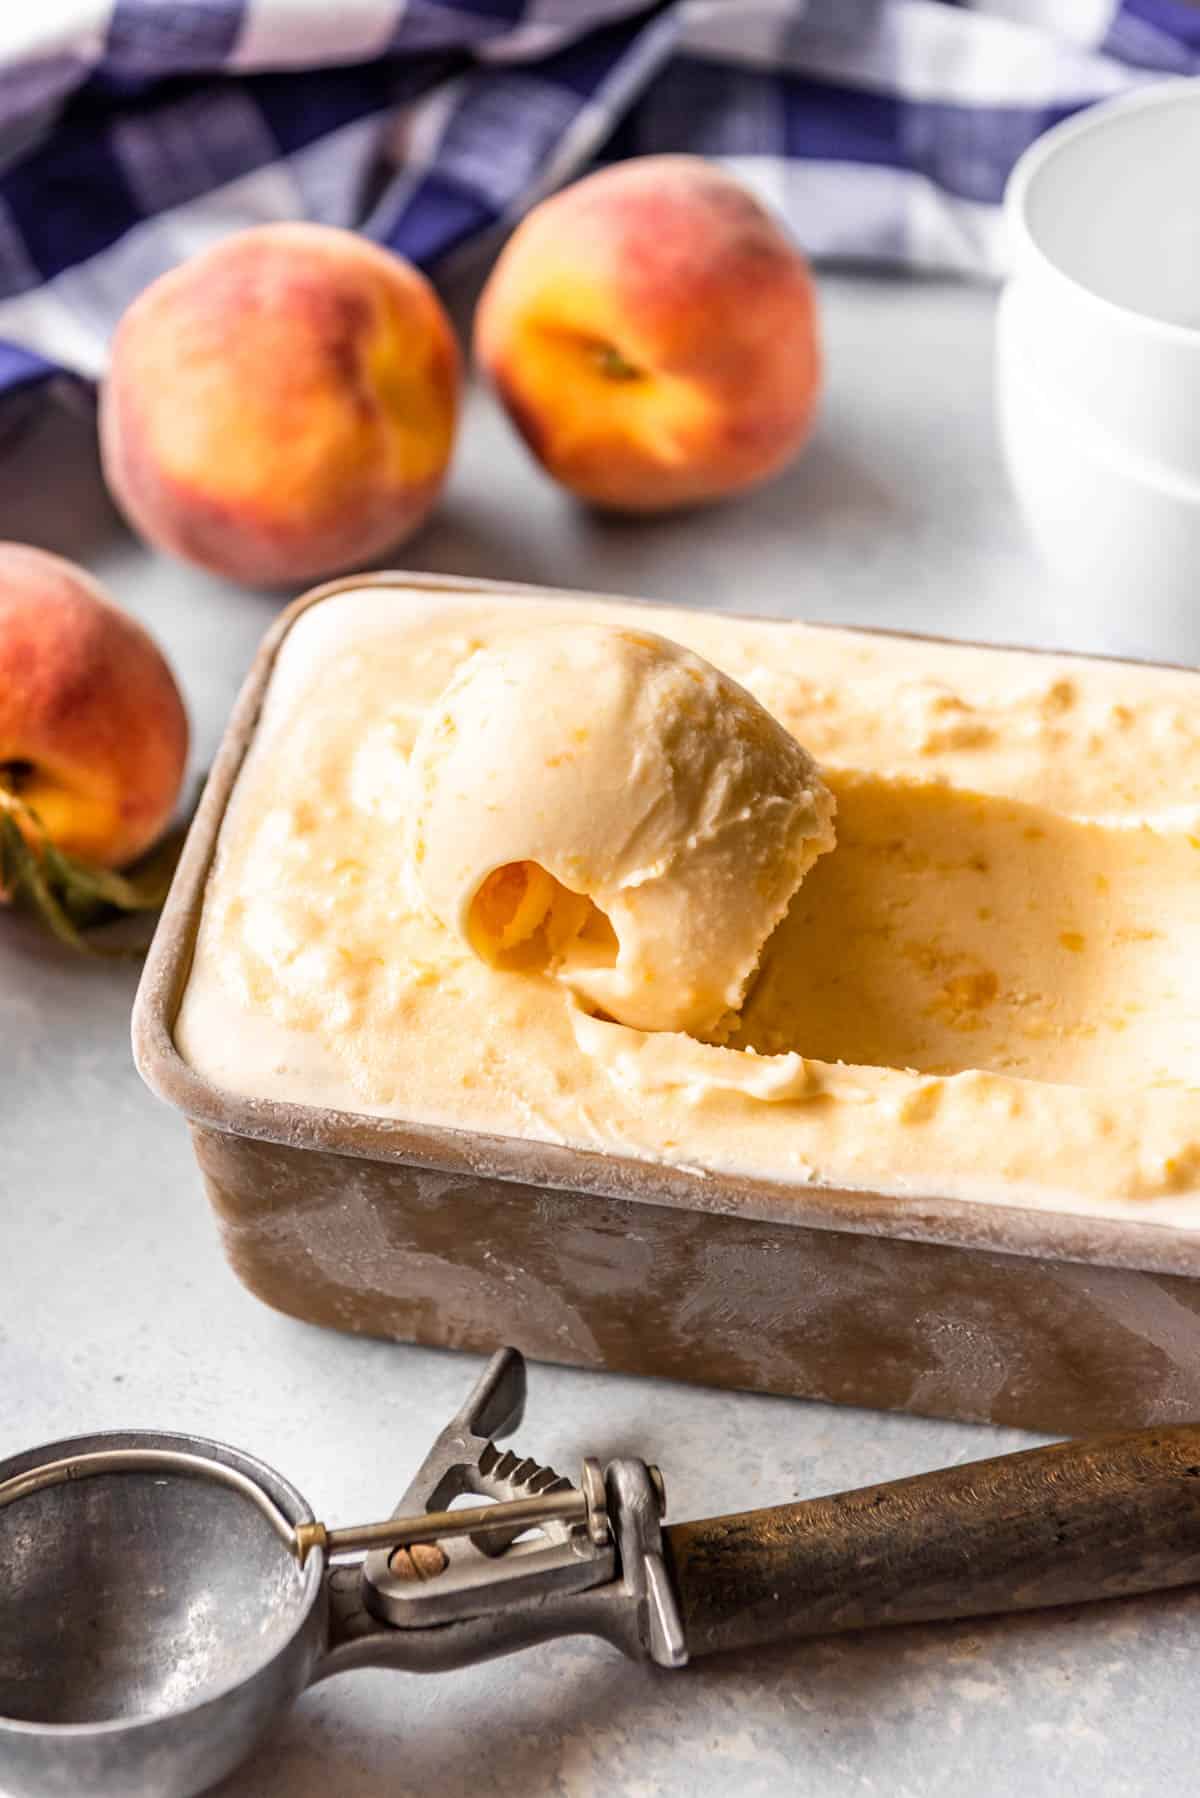 A scoop of fresh peach icecream in a loafpan with a curled scoop and a scooper off to the side.